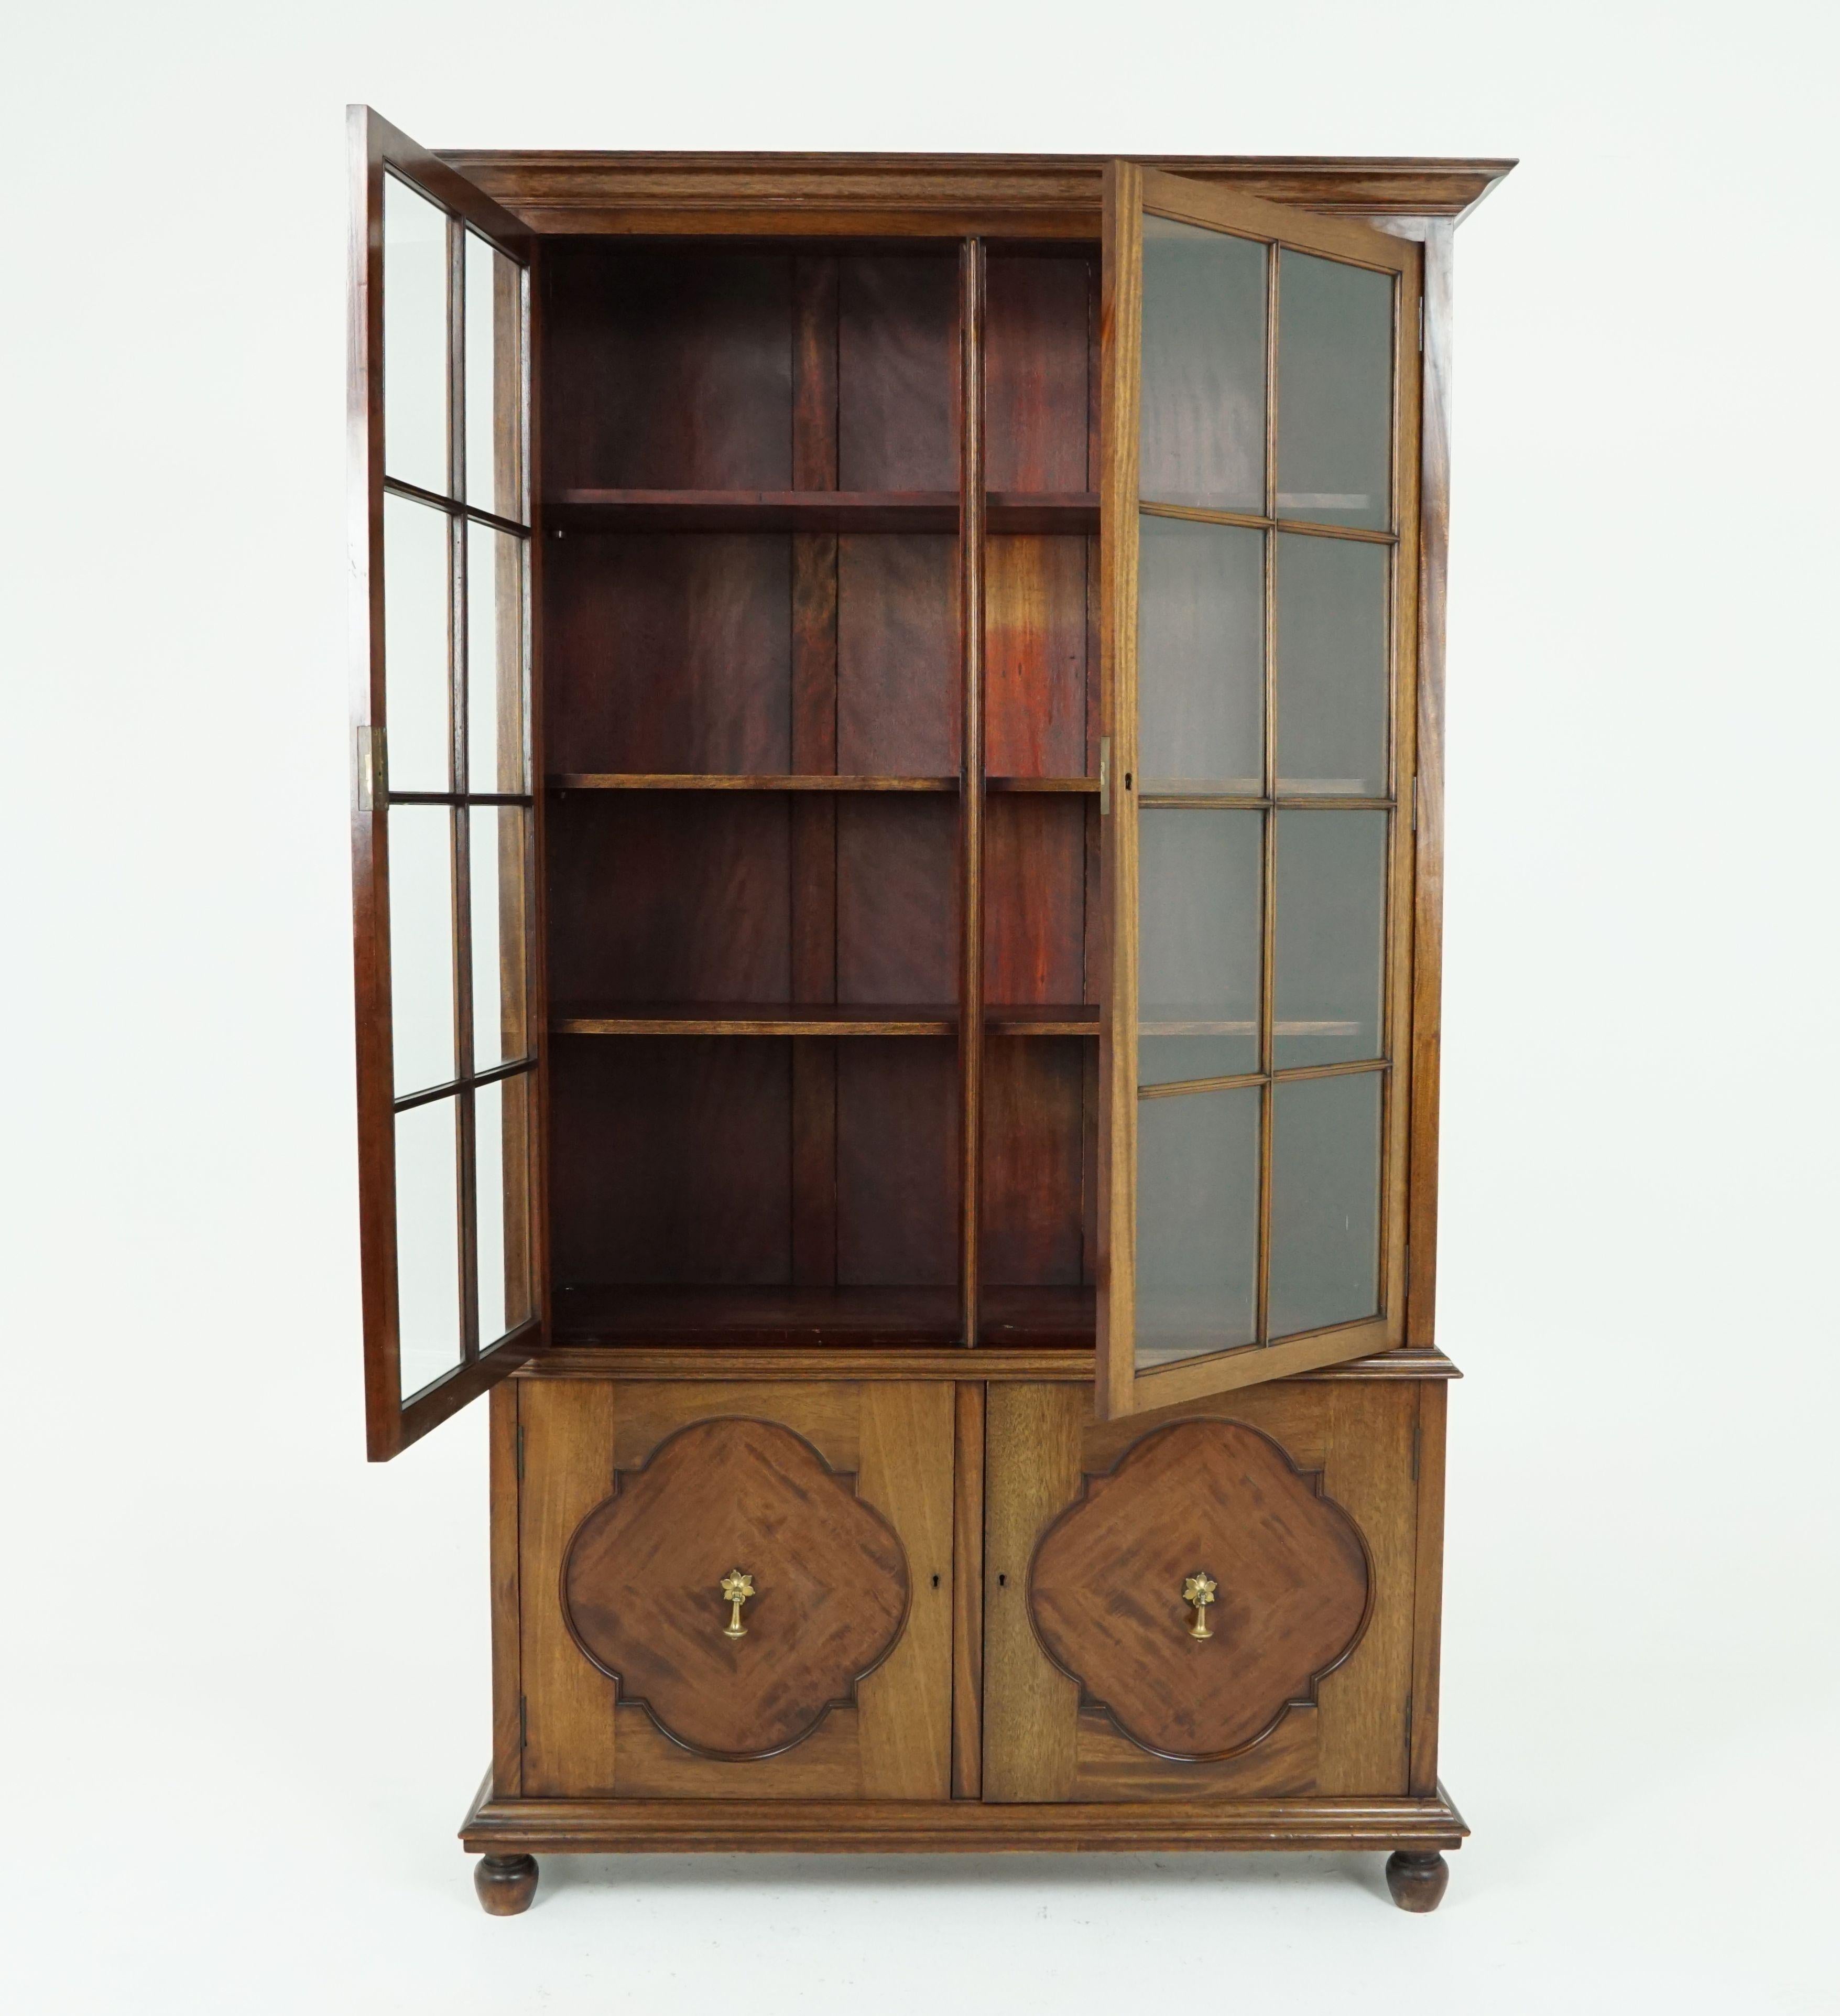 Antique walnut bookcase, tall 4-door display cabinet by A. Gardner & Son in Glasgow, Antique Furniture, Scotland 1910, B1861

Scotland, 1910
Solid walnut and veneer
Original finish
Flared out shaped cornice above
Pair of rectangular doors